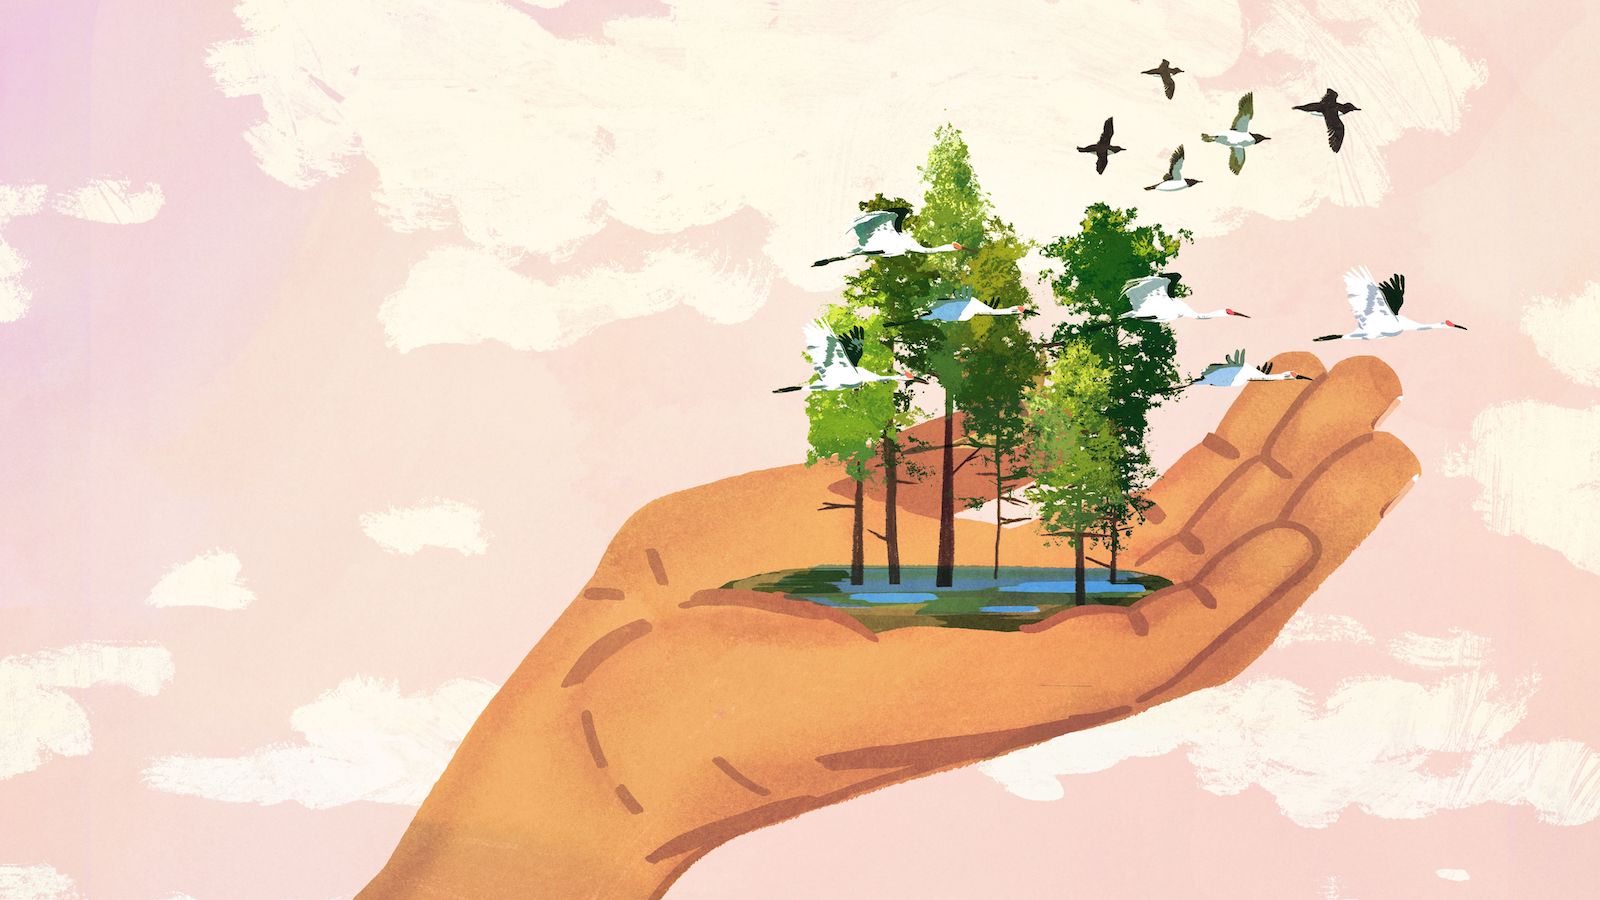 An illustration of a hand holding a copse of trees